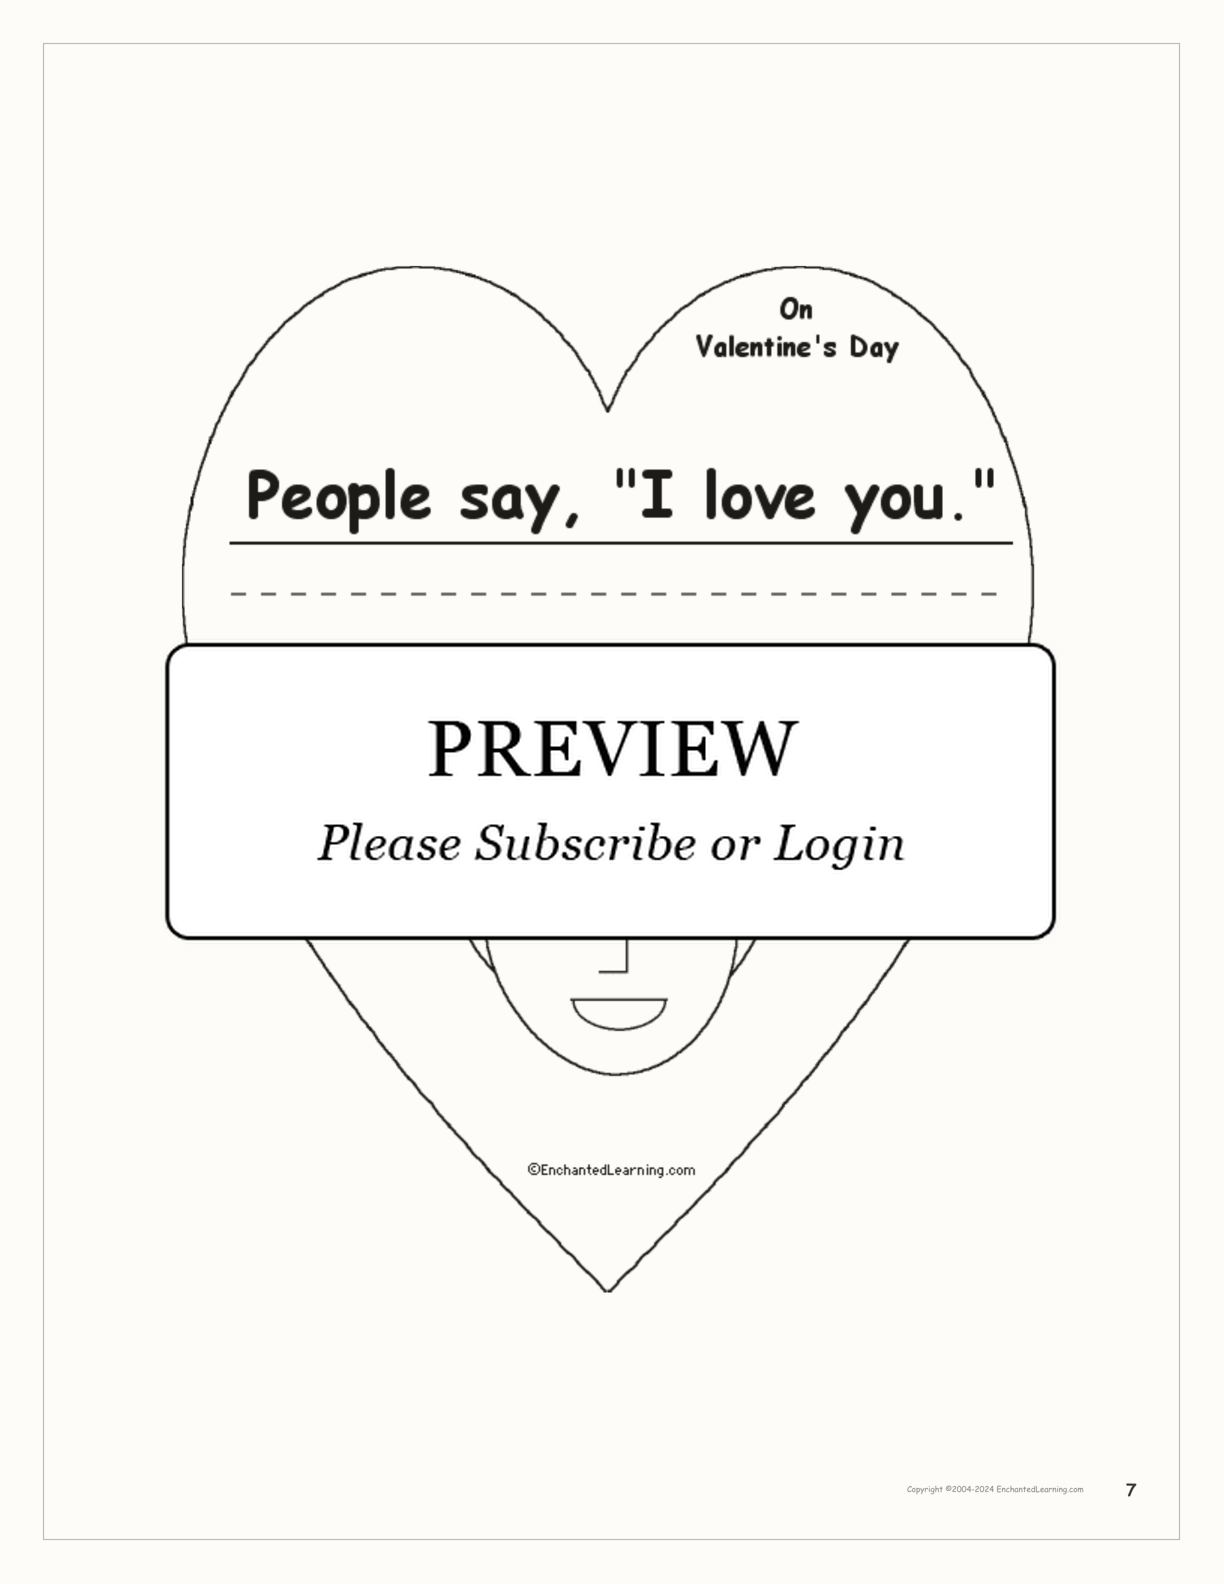 'On Valentine's Day, People...' Early Reader Book interactive worksheet page 7